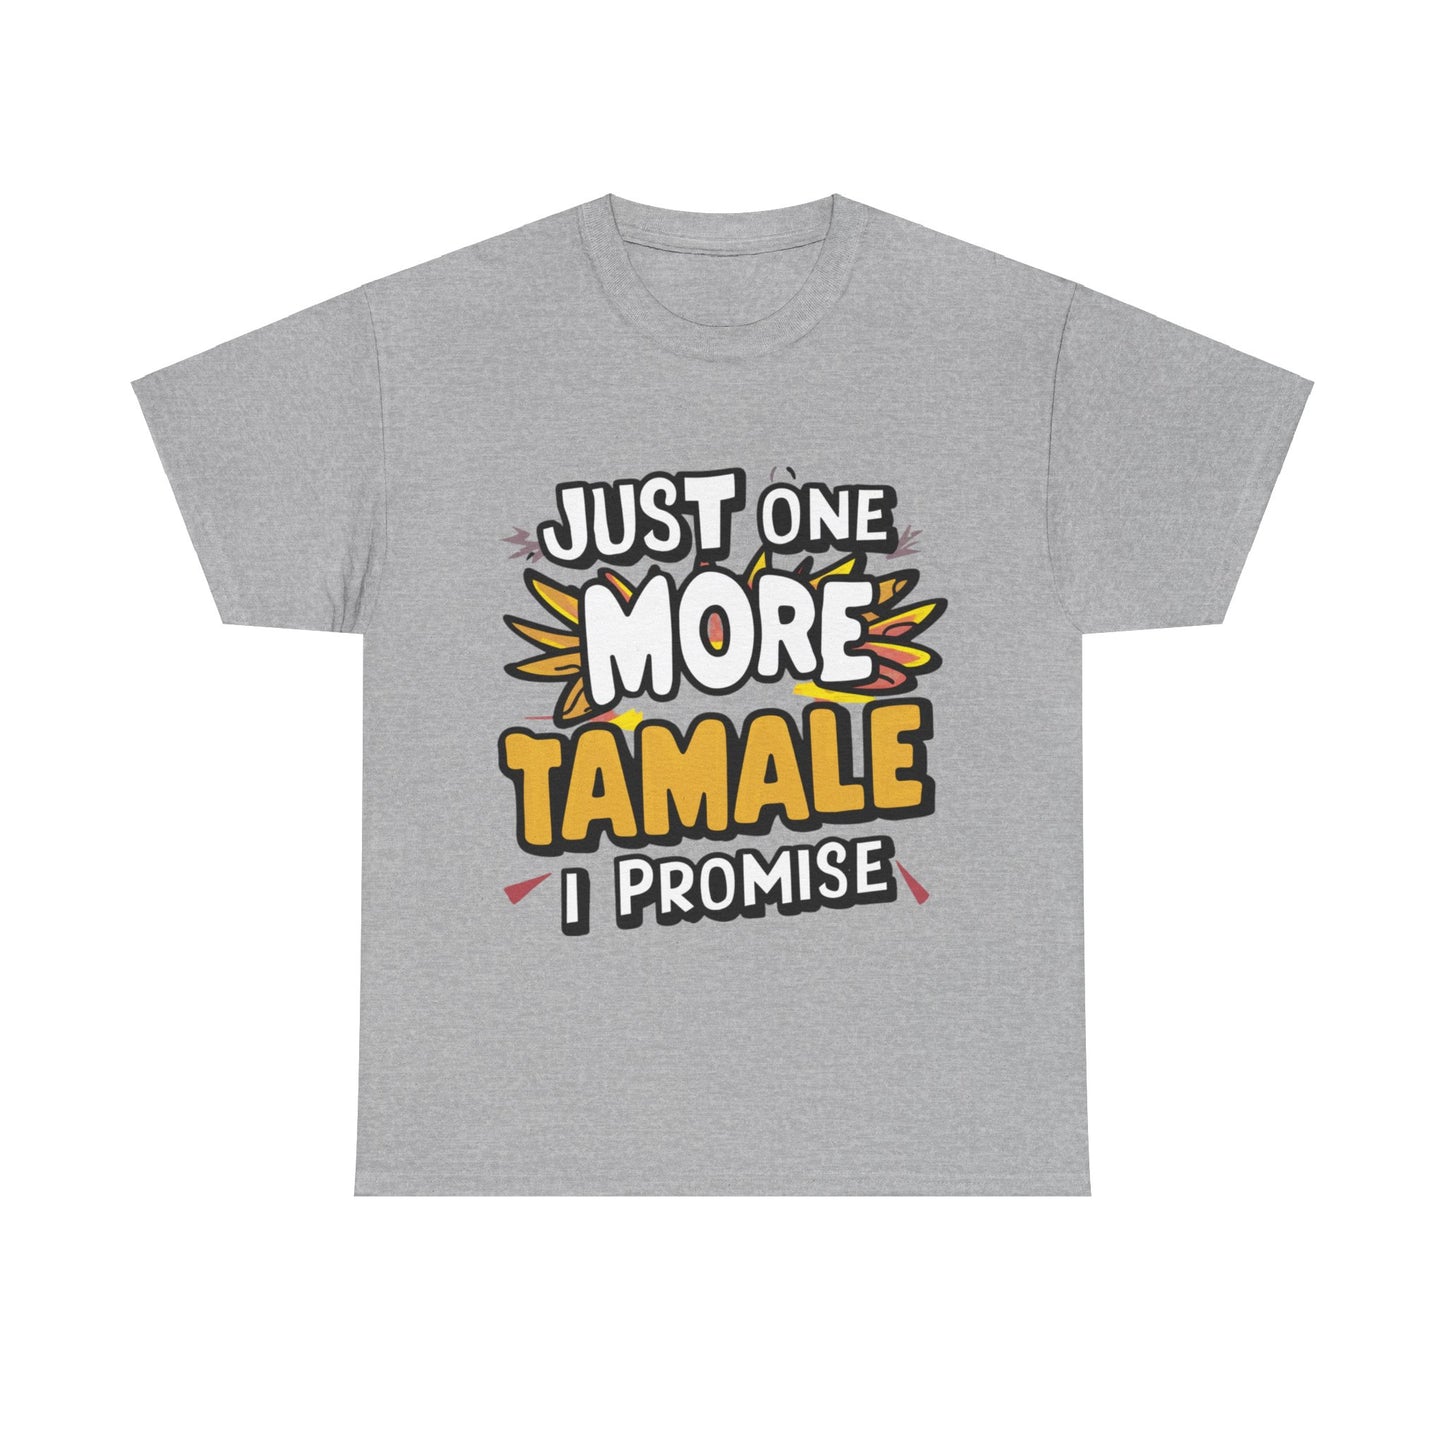 Just One More Tamale I Promise Mexican Food Graphic Unisex Heavy Cotton Tee Cotton Funny Humorous Graphic Soft Premium Unisex Men Women Sport Grey T-shirt Birthday Gift-9